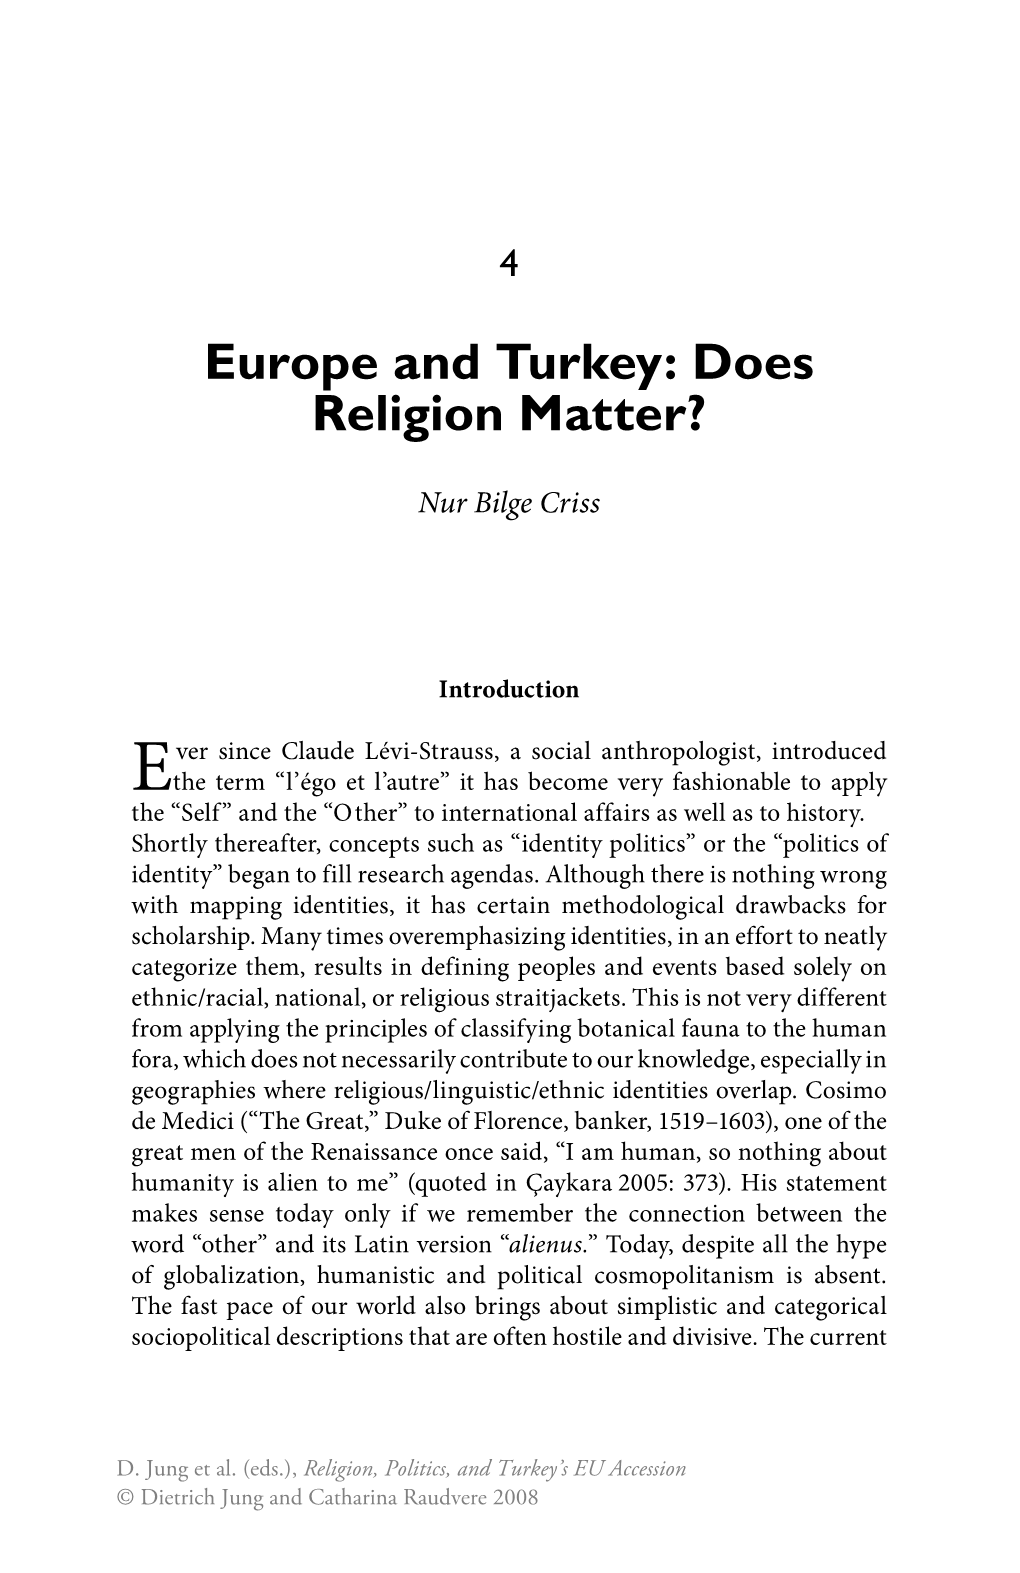 Europe and Turkey: Does Religion Matter?